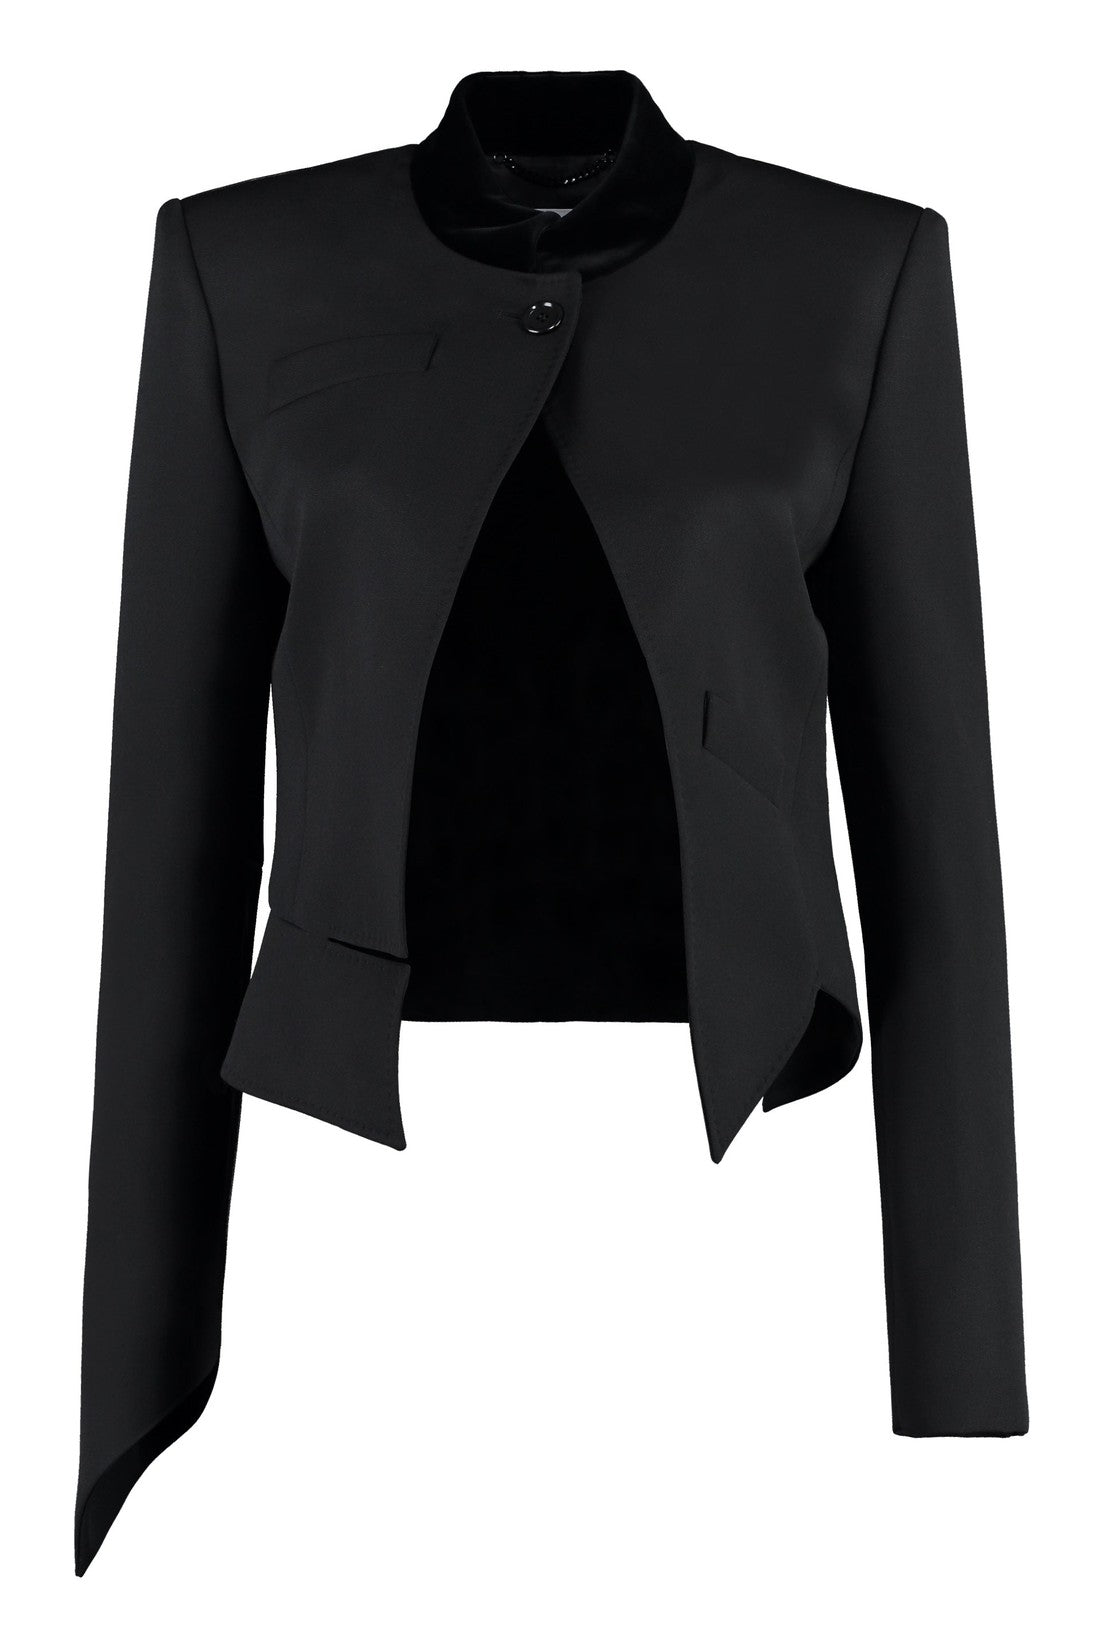 Moschino-OUTLET-SALE-Virgin wool jacket-ARCHIVIST